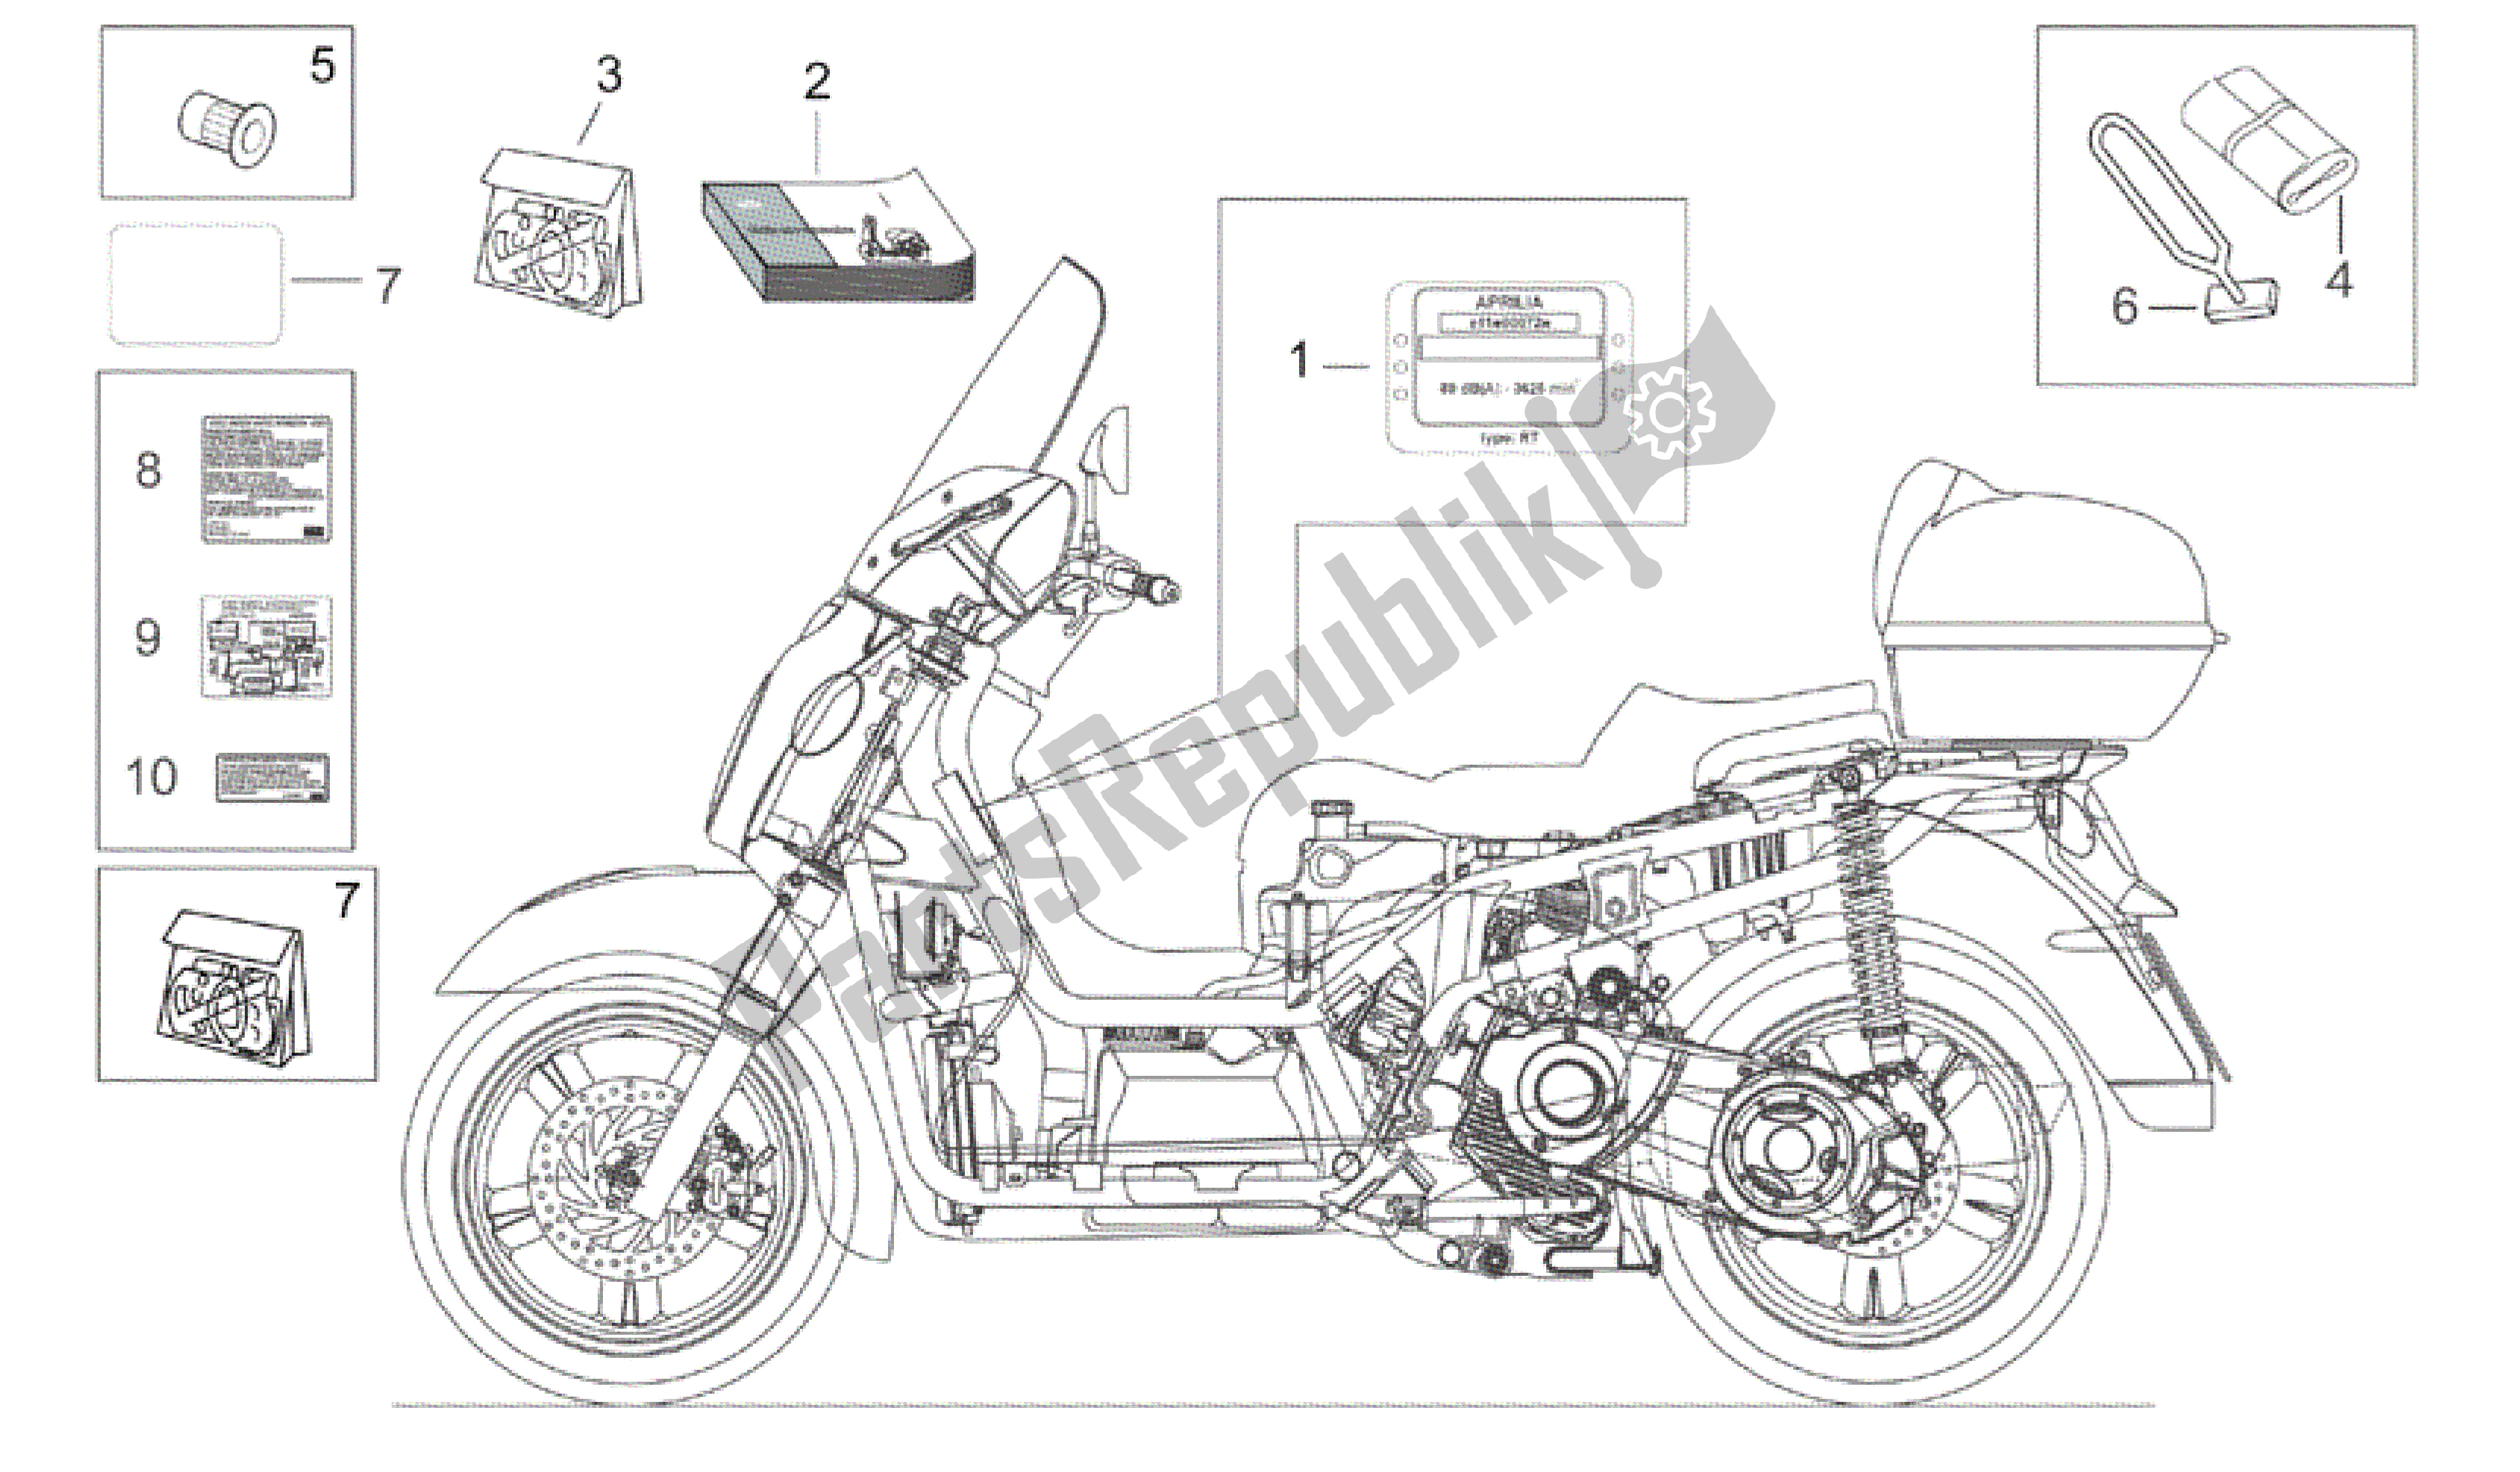 All parts for the Completing Part of the Aprilia Scarabeo 500 2003 - 2006